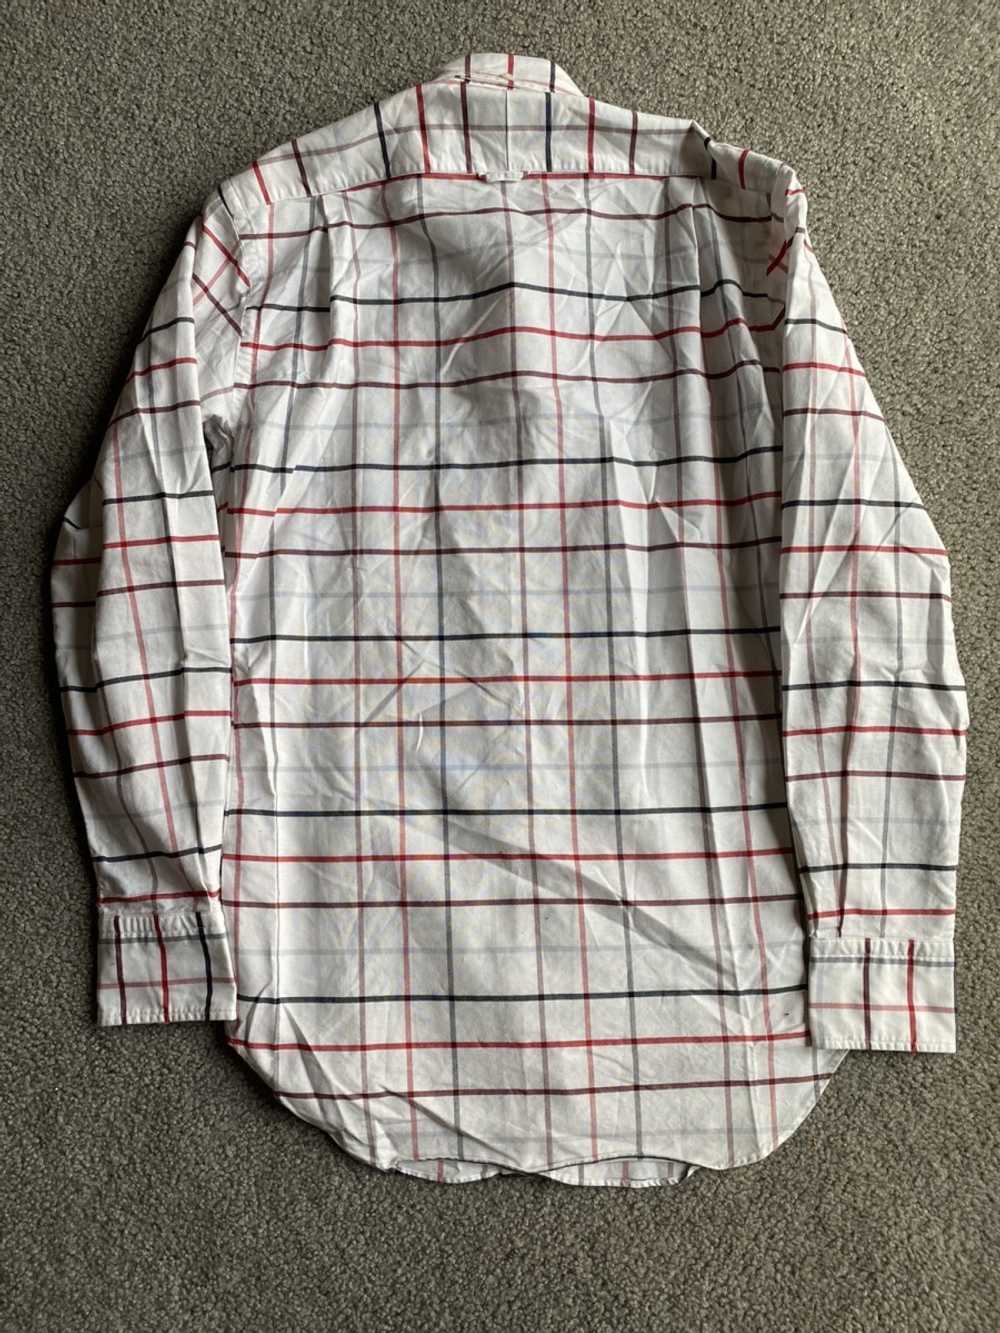 Thom Browne checkered button up shirt - image 2